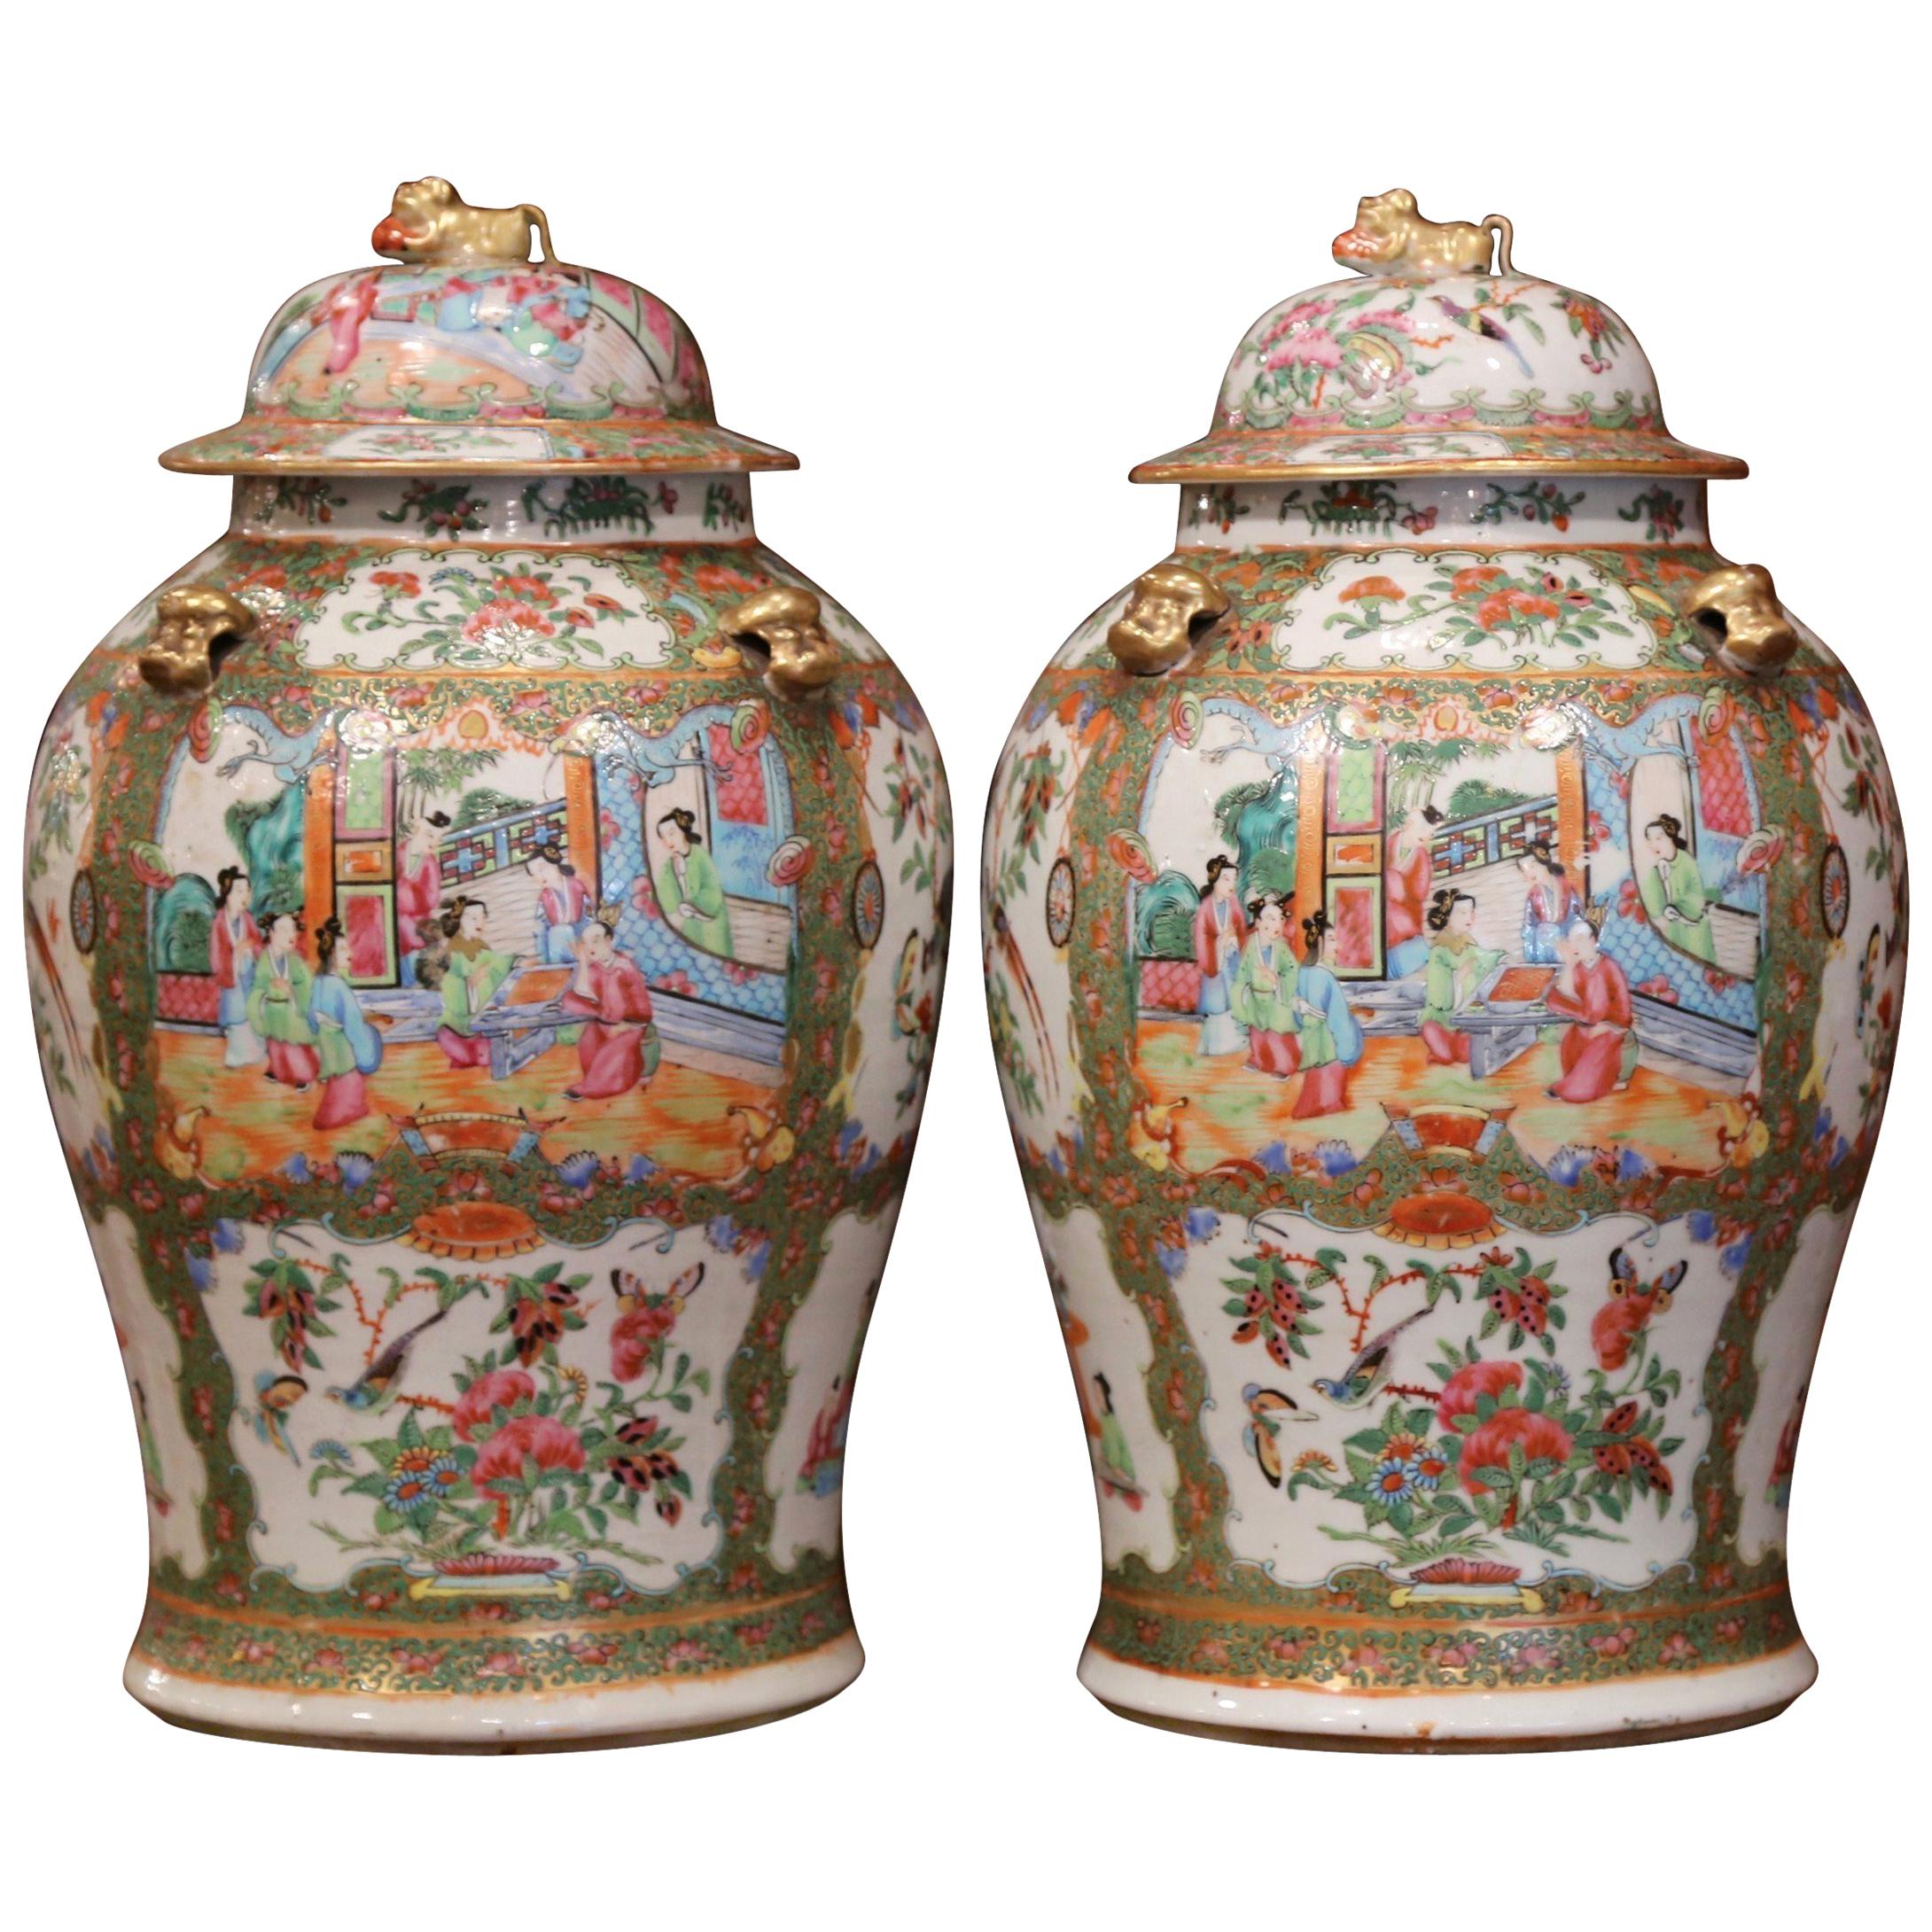 Pair of 19th Century Chinese Porcelain Famille Rose Jars with Foo Dogs Lids